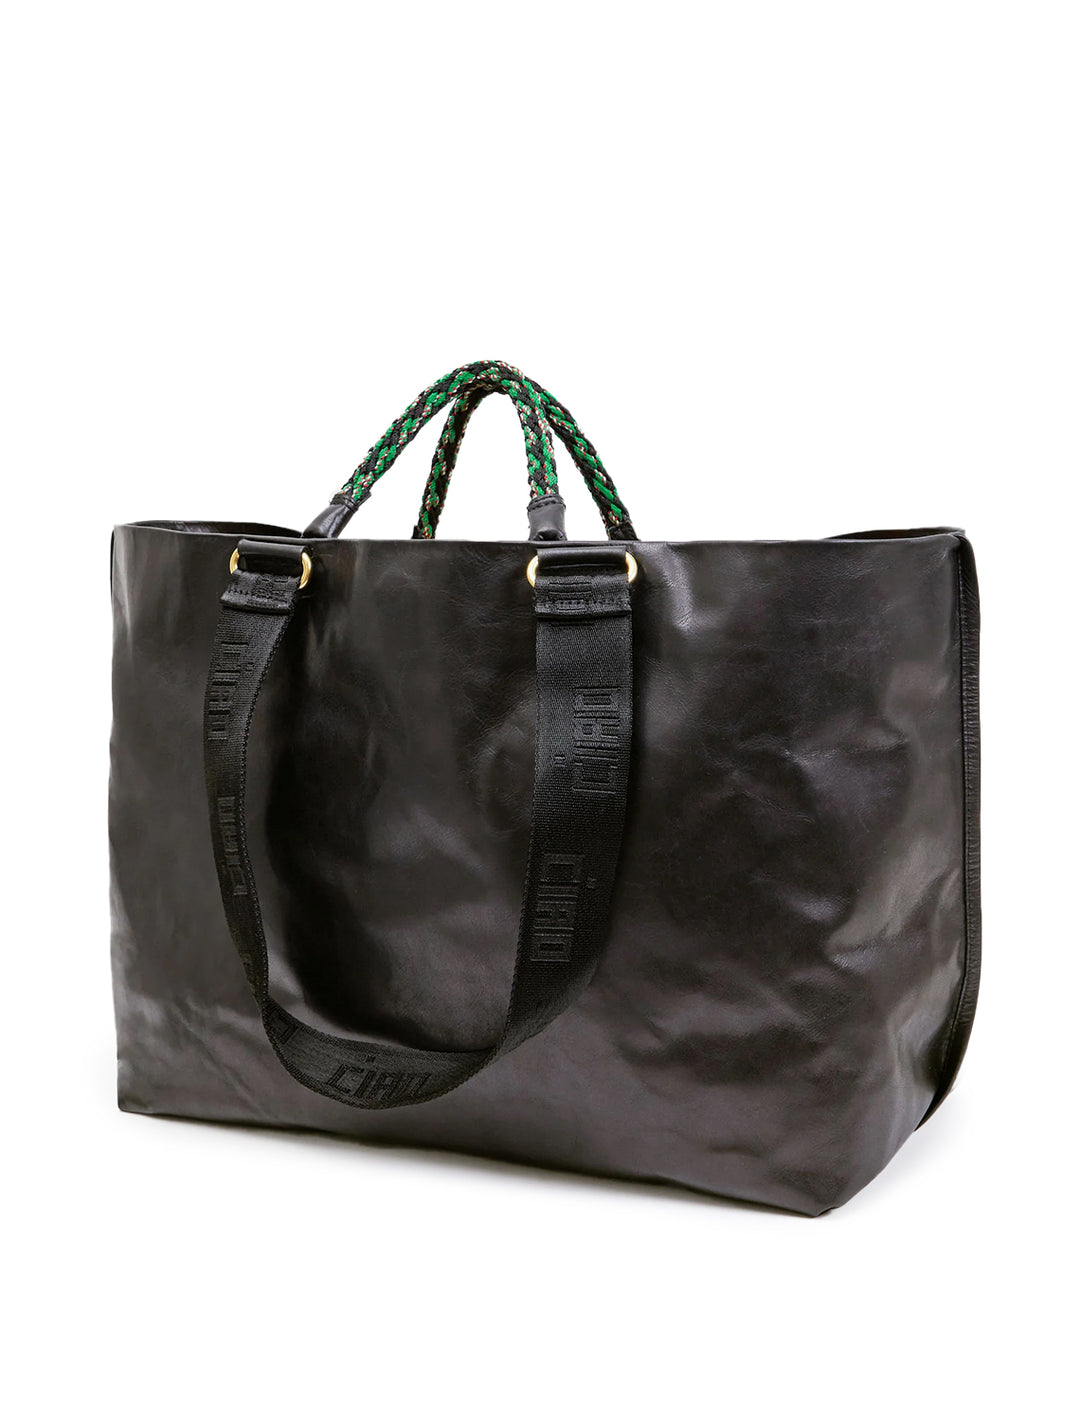 Back angle view of Clare V.'s grande bateau tote in black new look.